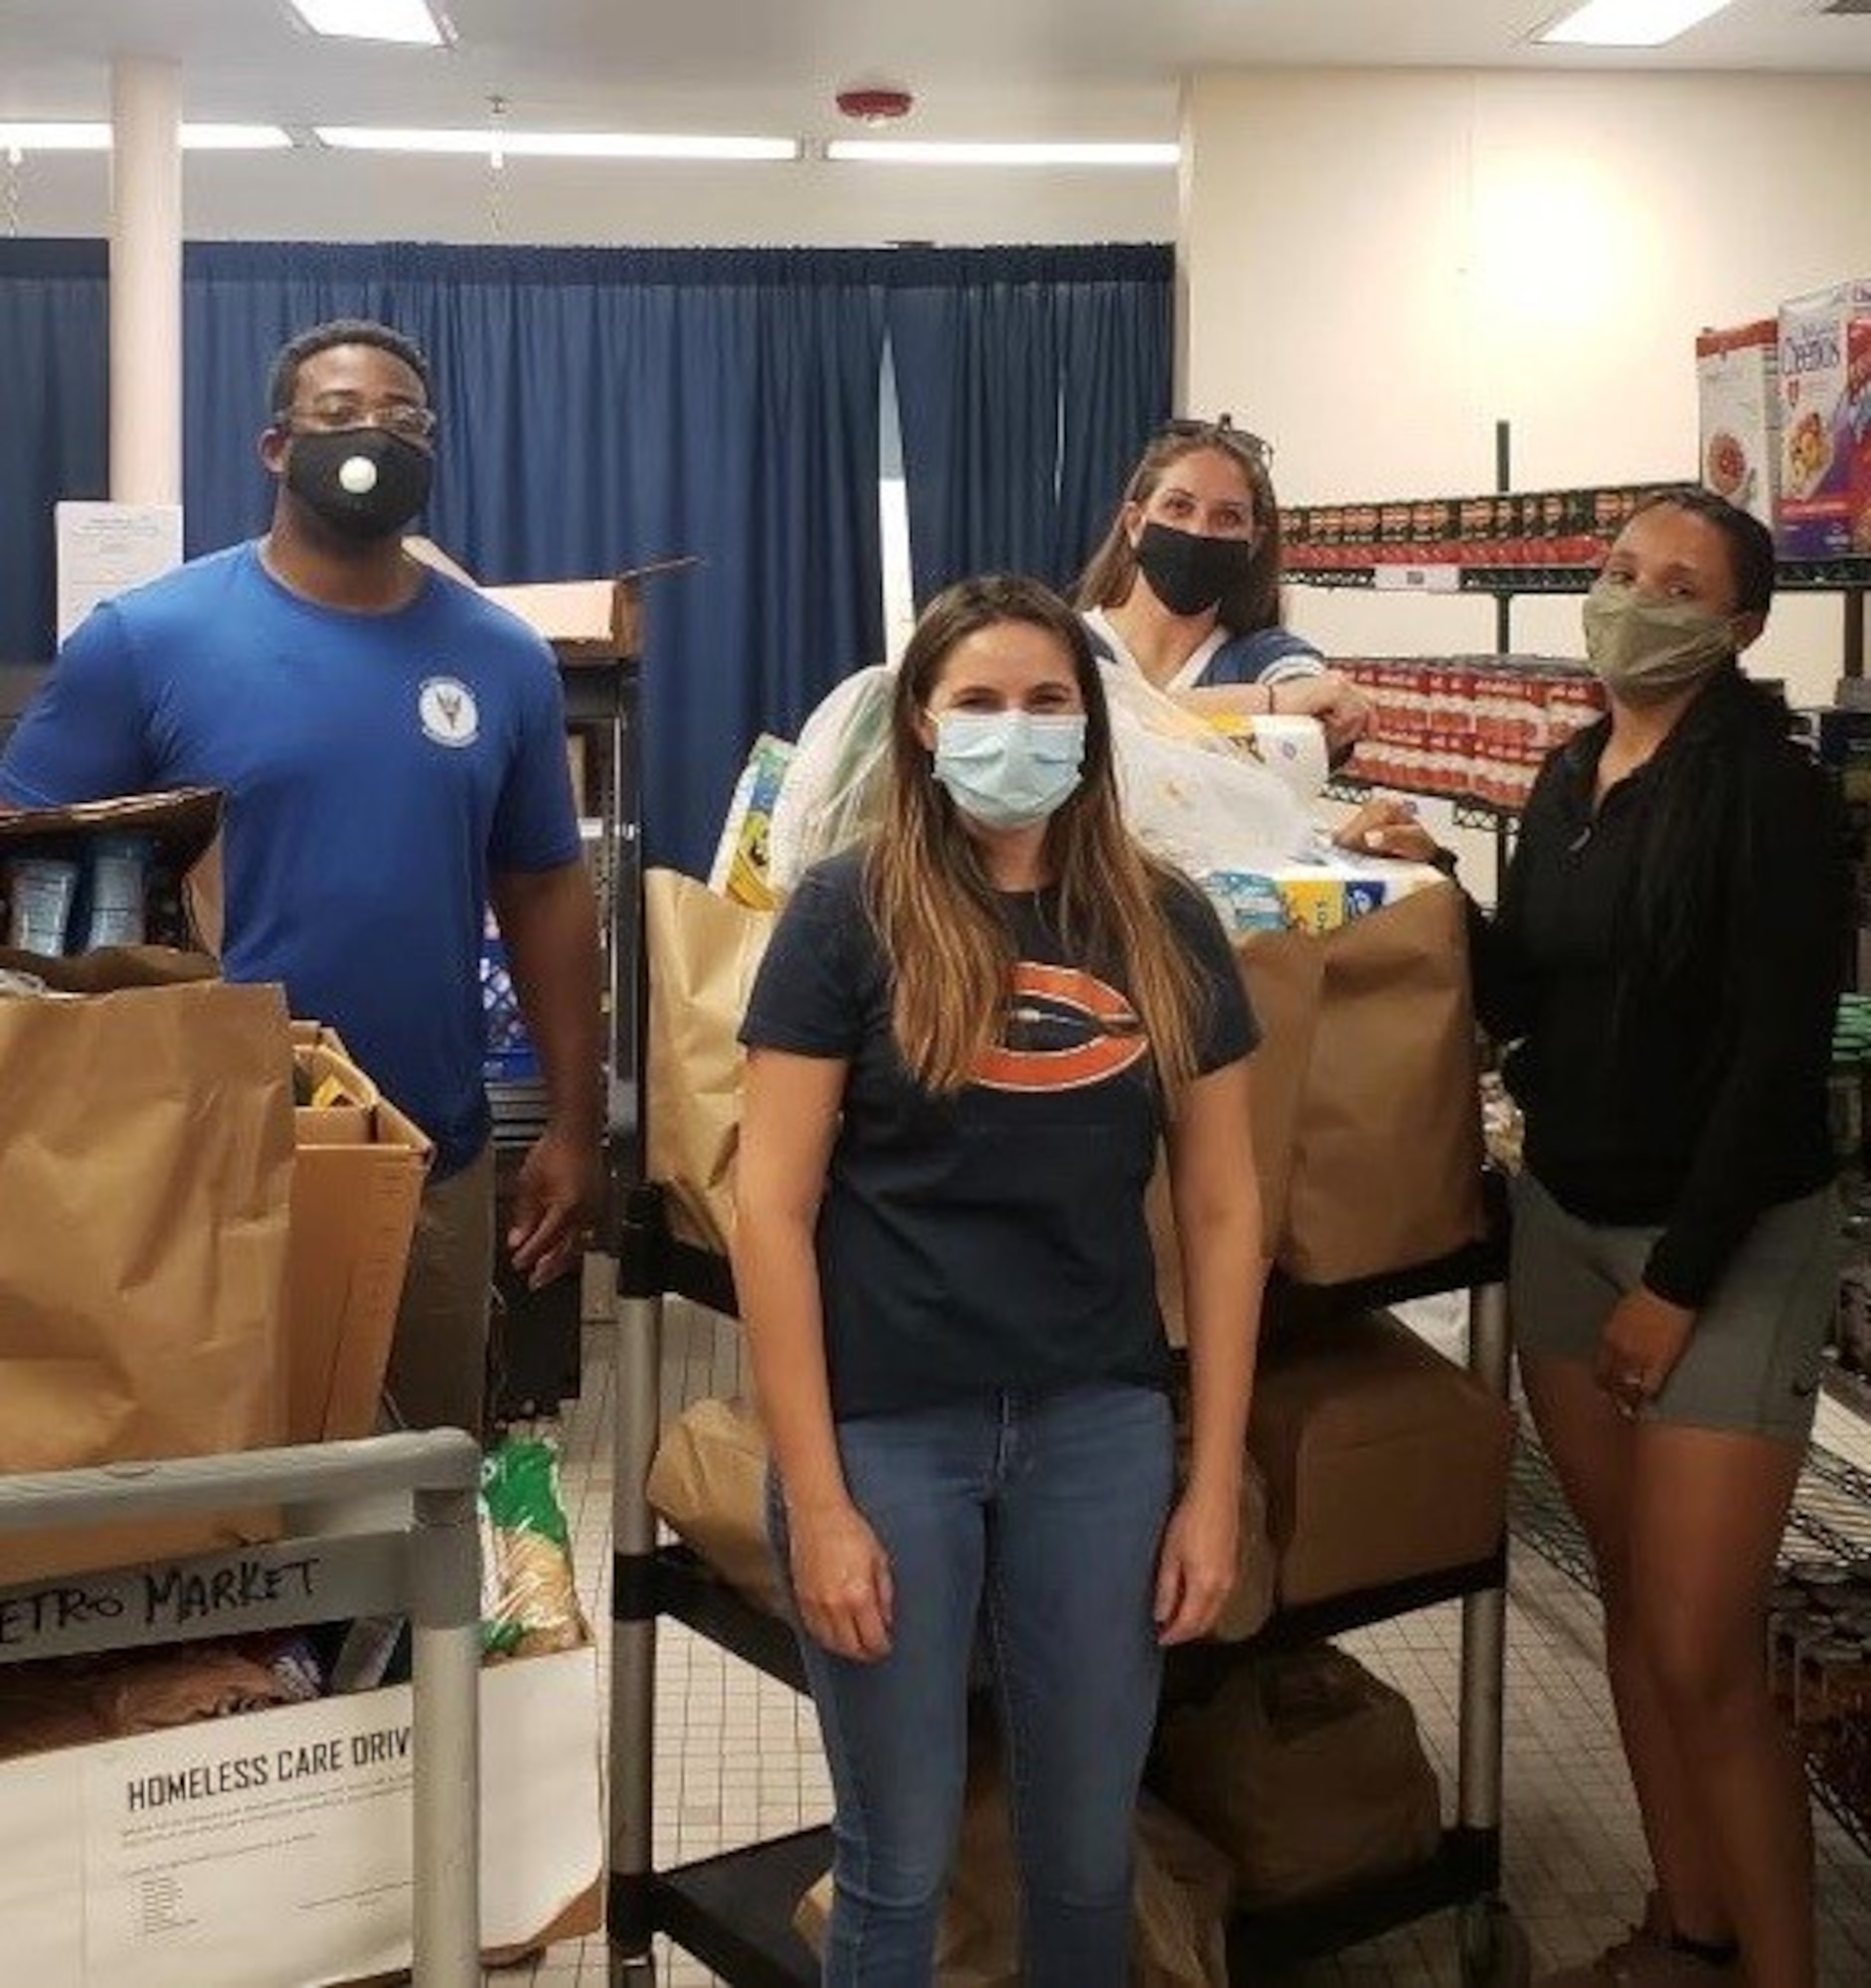 Members of the MacDill Air Force Base 5/6 Council, donate goods during a homeless care drive, May 23, 2020, in Tampa Fla. Council members collected goods at MacDill Air Force Base, Fla., which were donated to the less fortunate in the Tampa community.